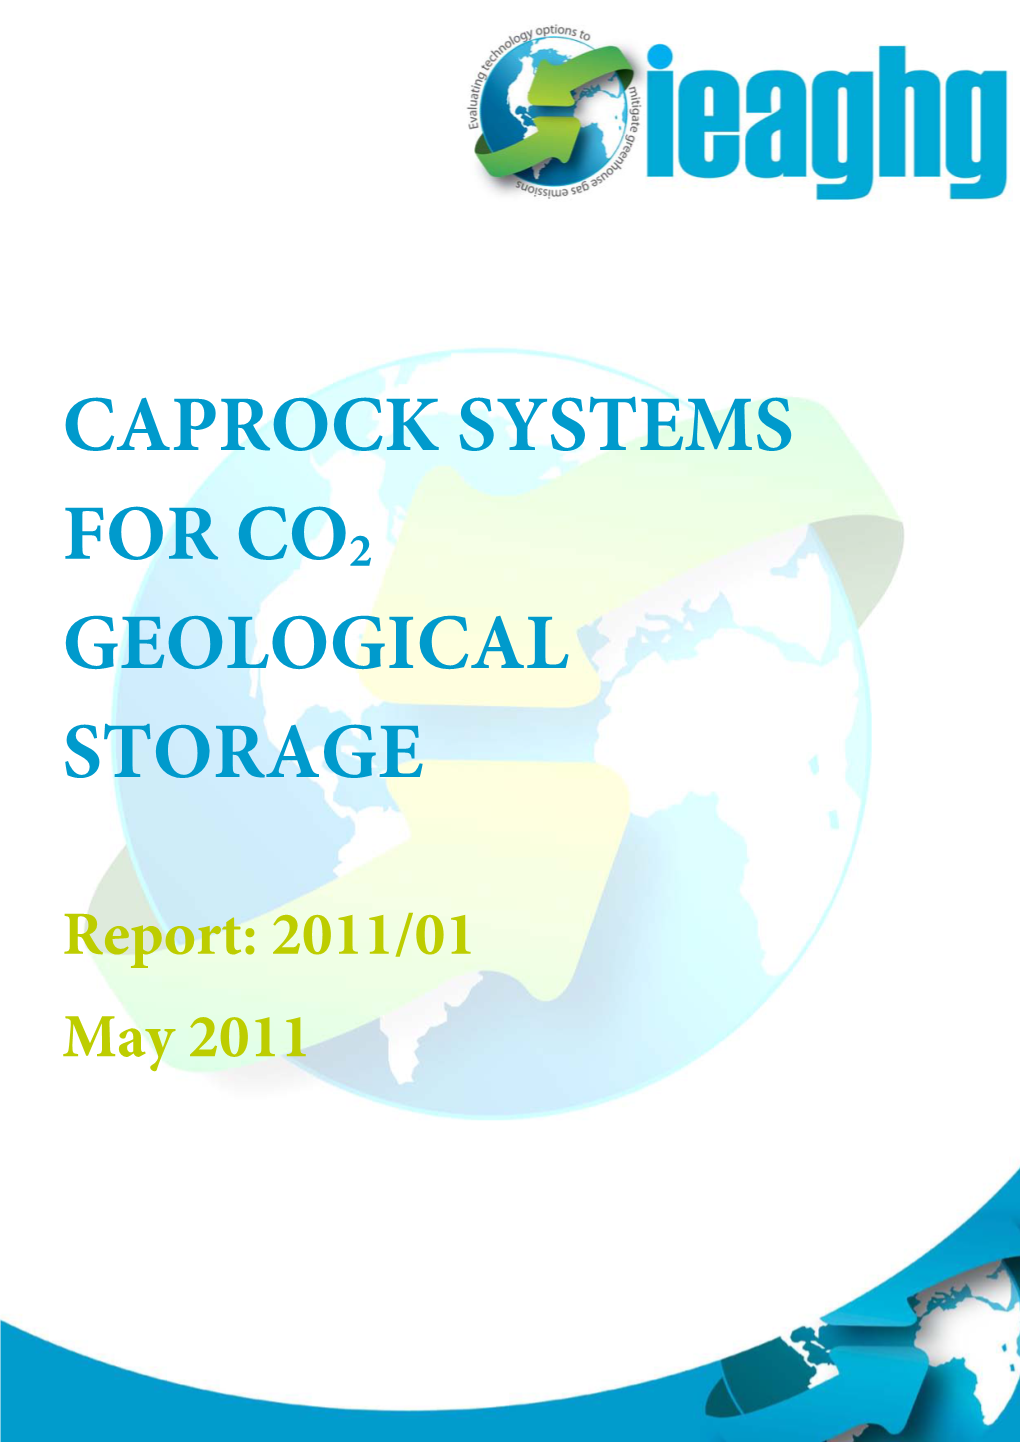 Caprock Systems for CO2 Geological Storage”, 2011/01, May, 2011.’